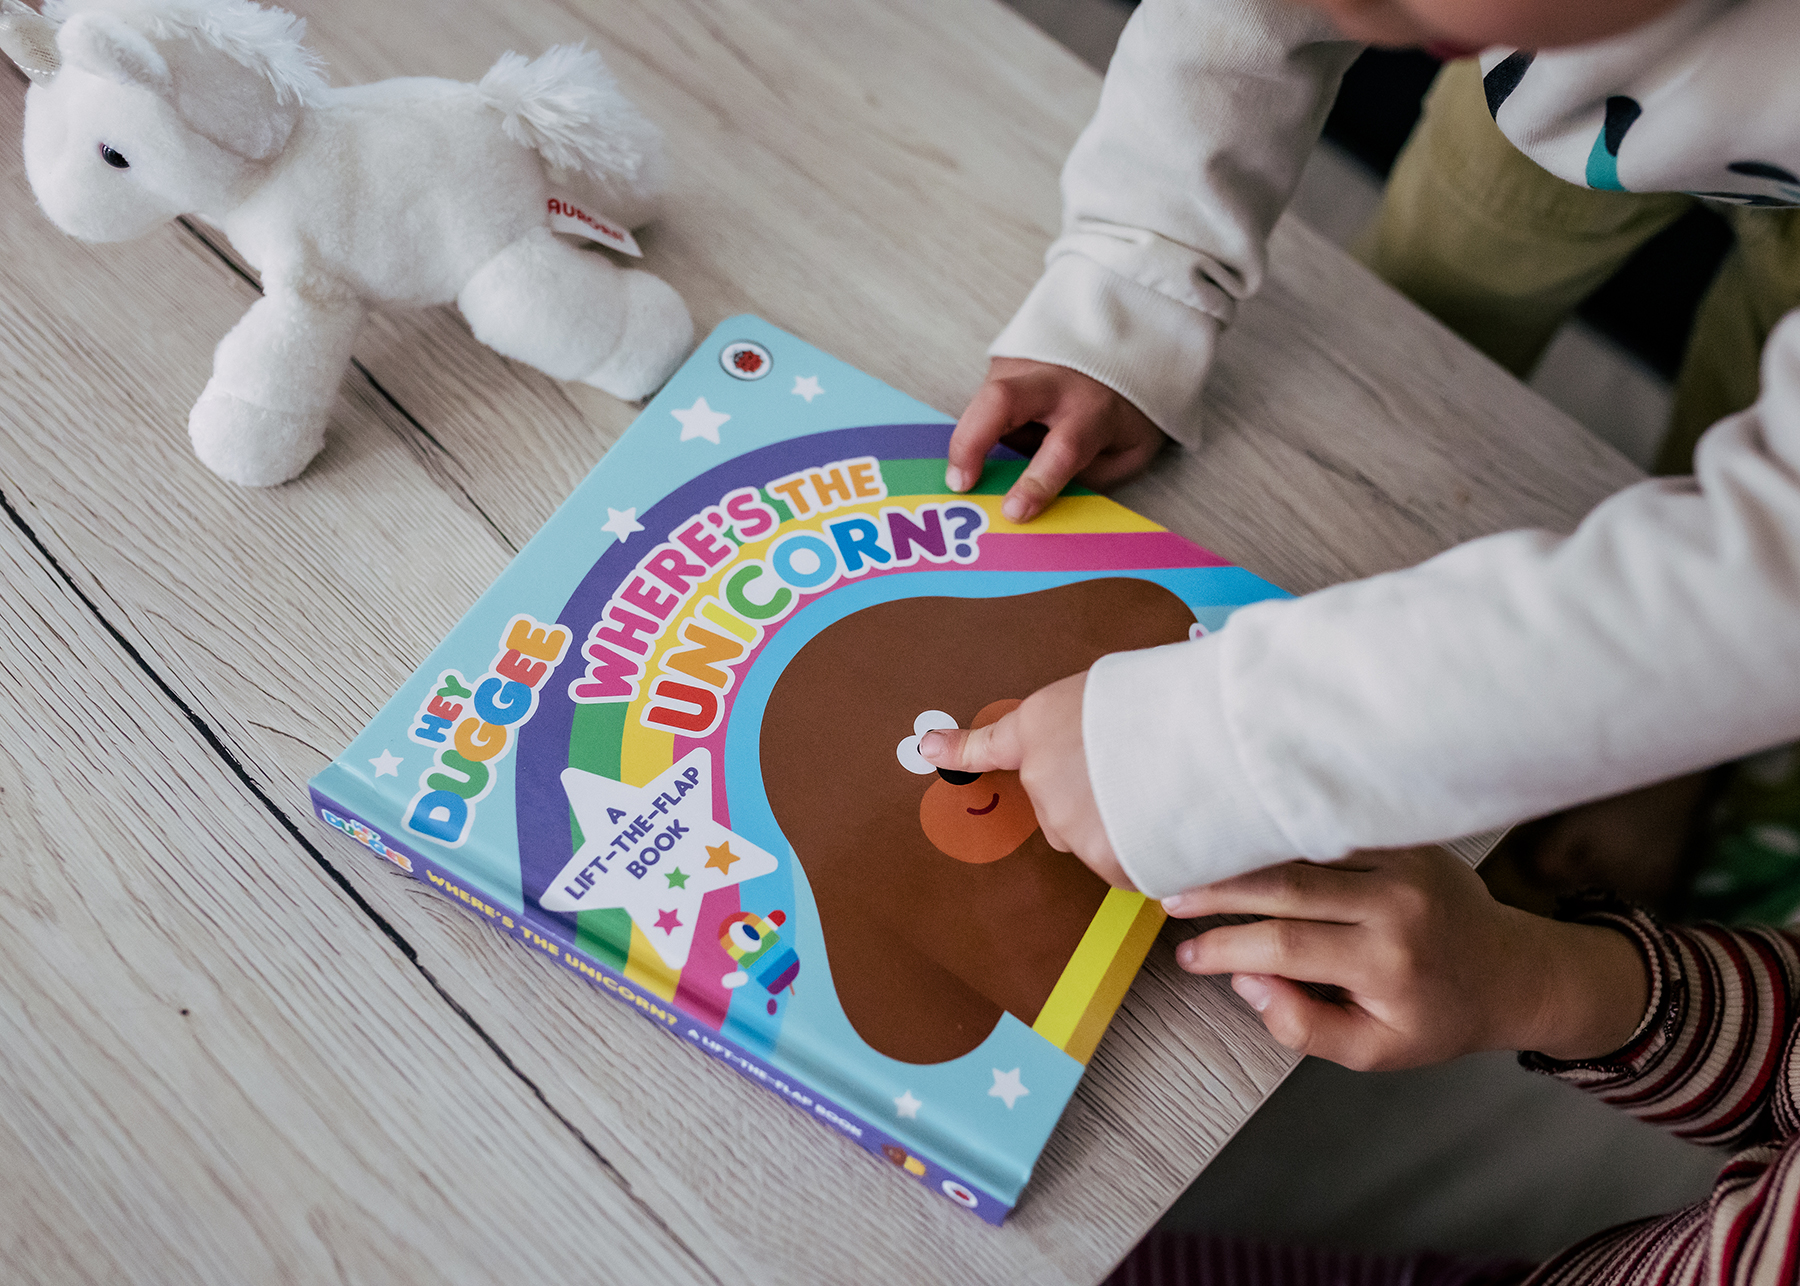 A photo of a Hey Duggee boo. There are two pairs of hands of children. One pair is pointing to Duggee's eyes on the front cover.